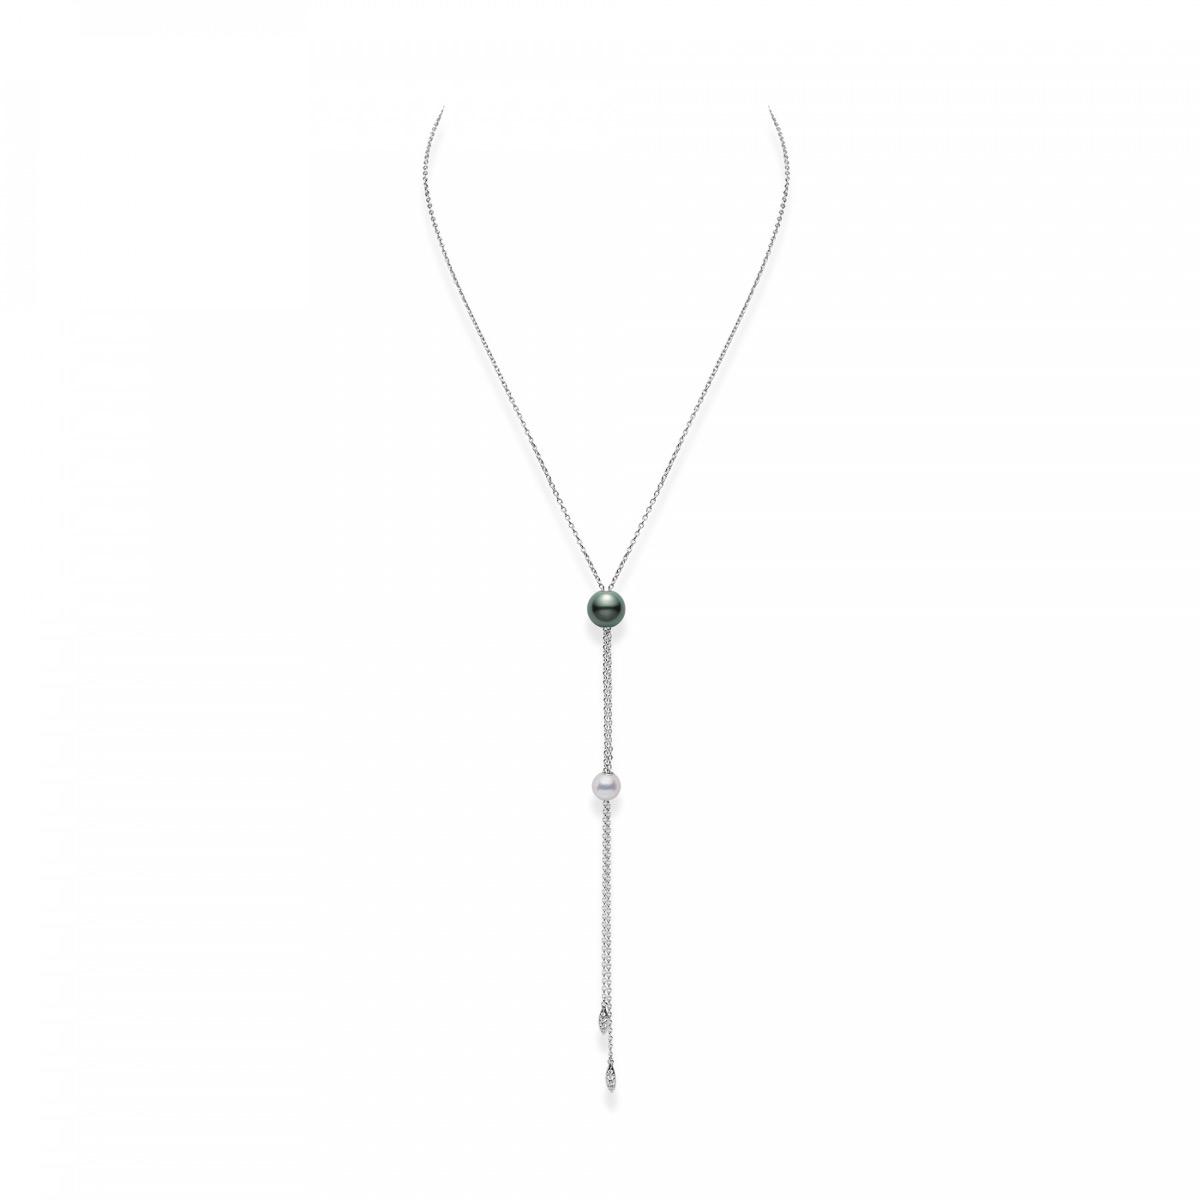 Mikimoto Pearls in Motion Akoya and Black South Sea Cultured Pearl Pendant in 18K White Gold 0